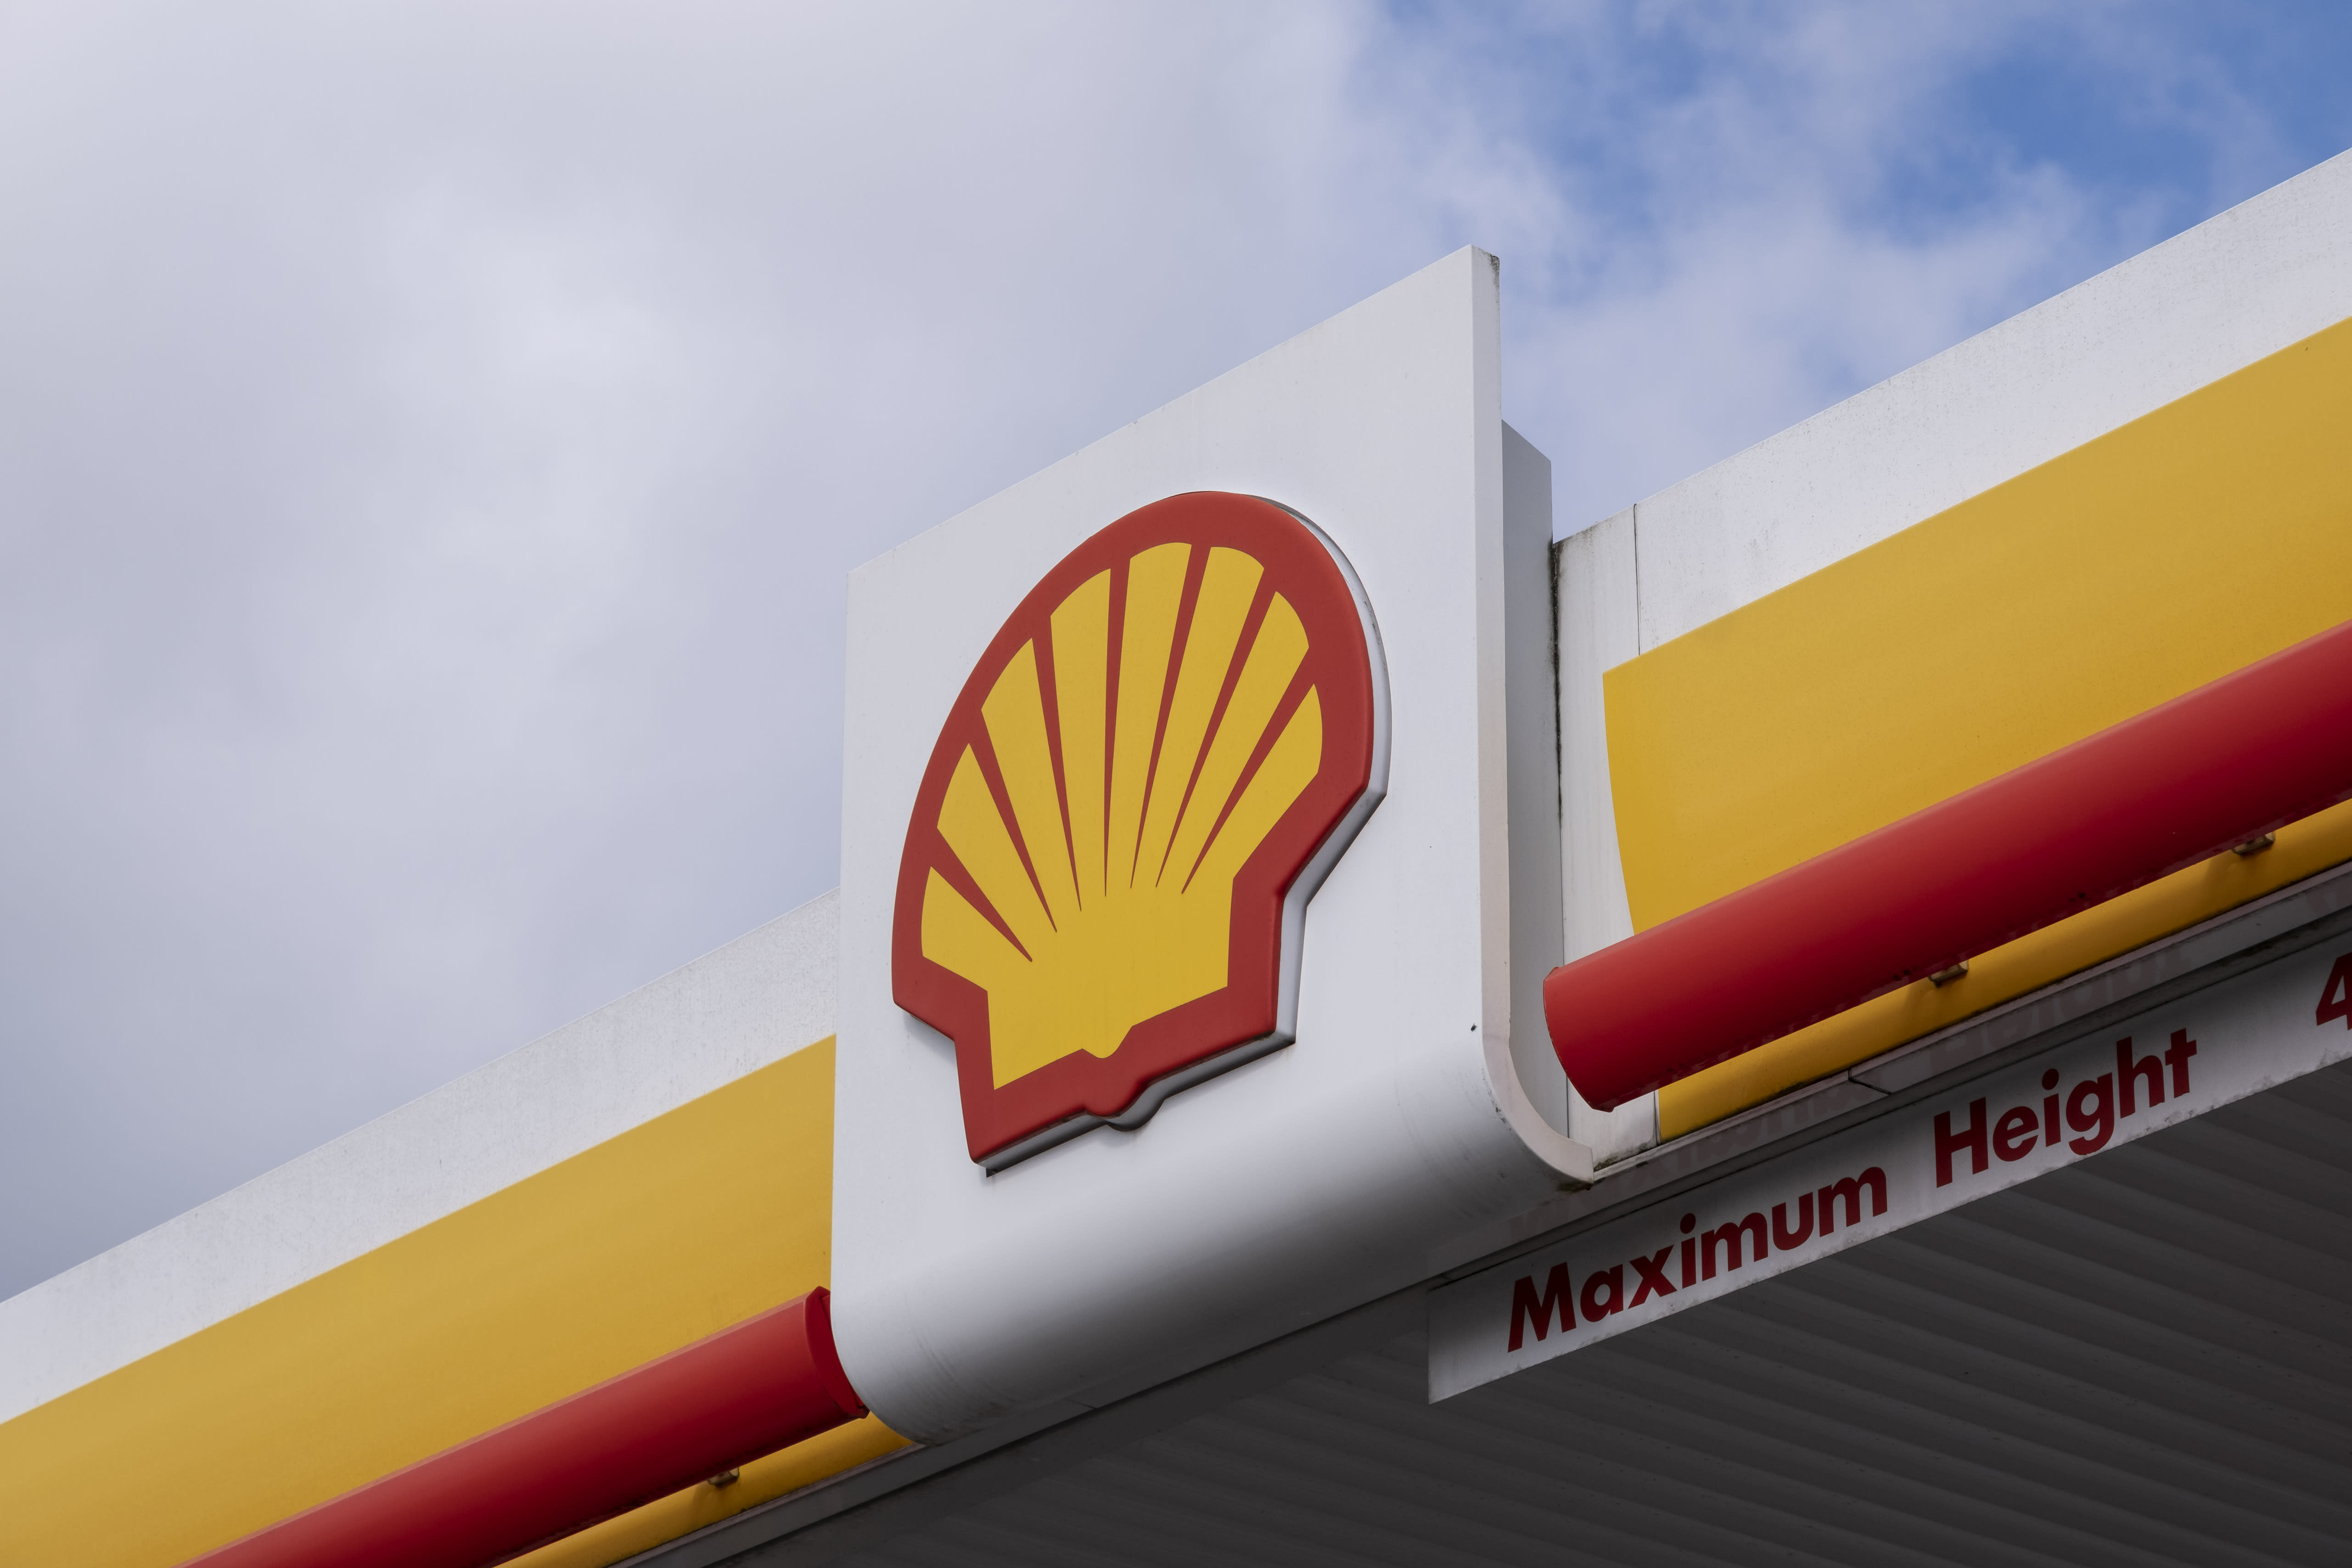 Oil major Shell reports sharp upswing in full-year profit, raises dividend and buybacks